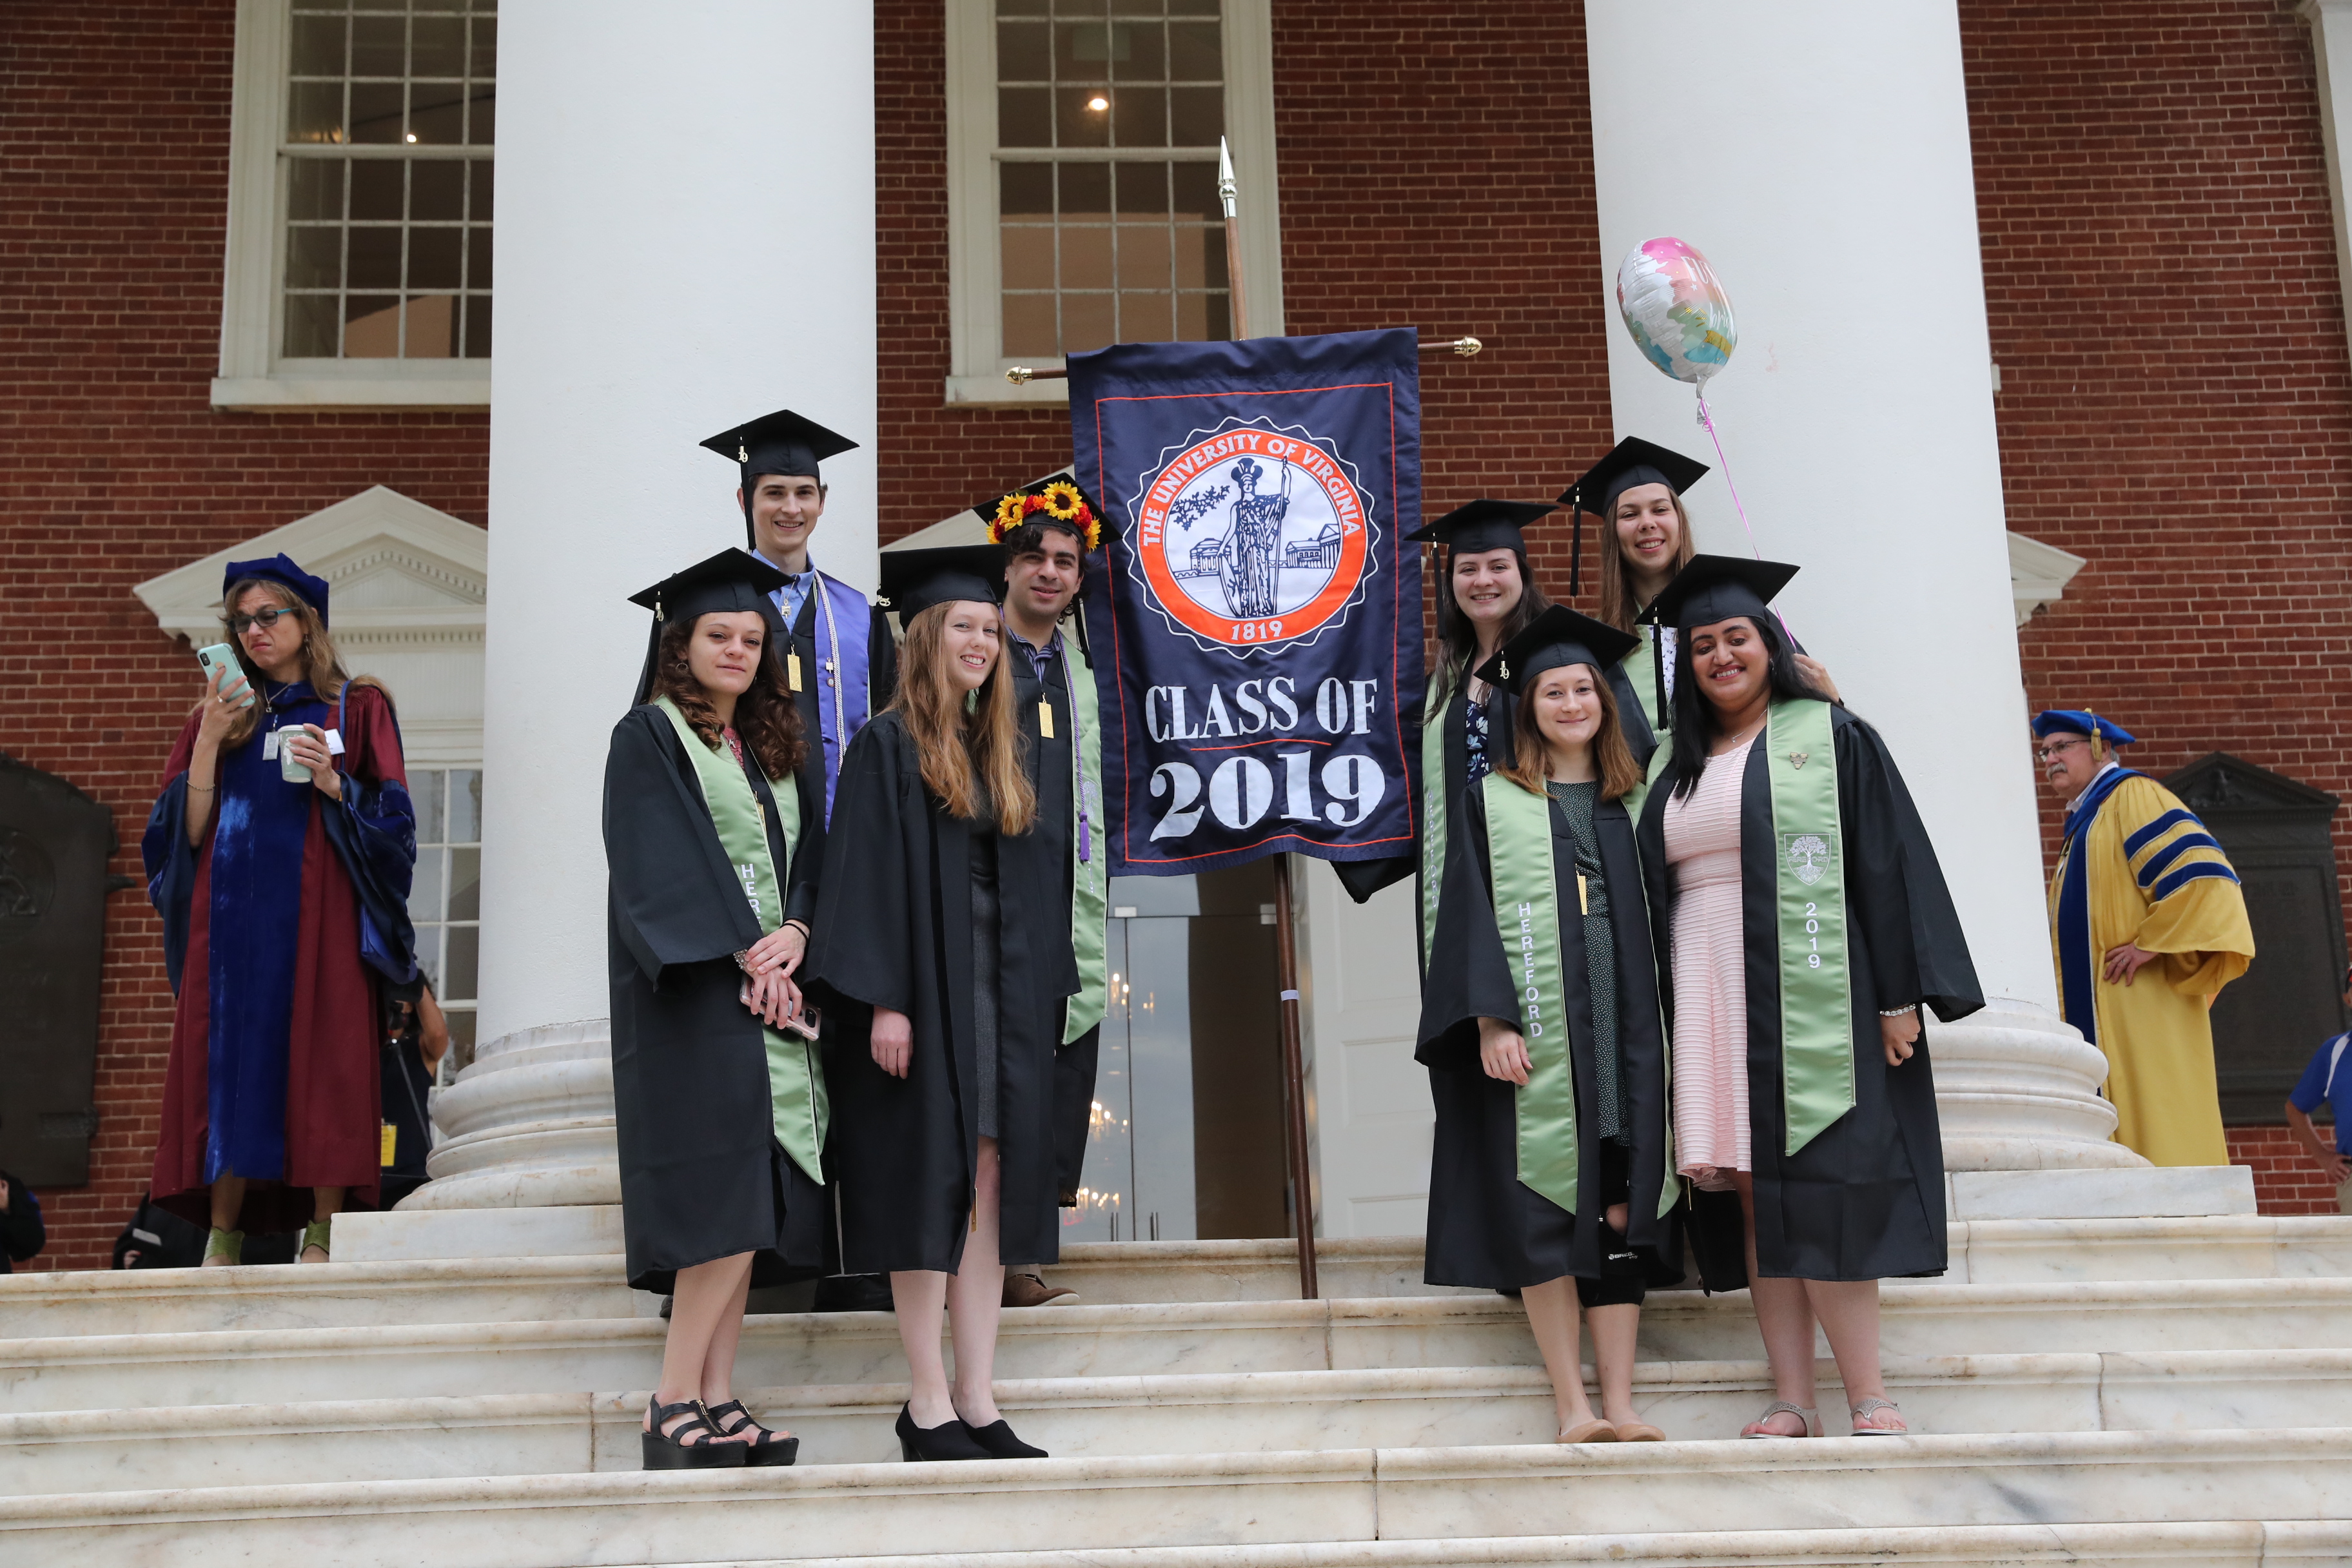 Graduates stand for a group photo next to a banner that says Class of 2019